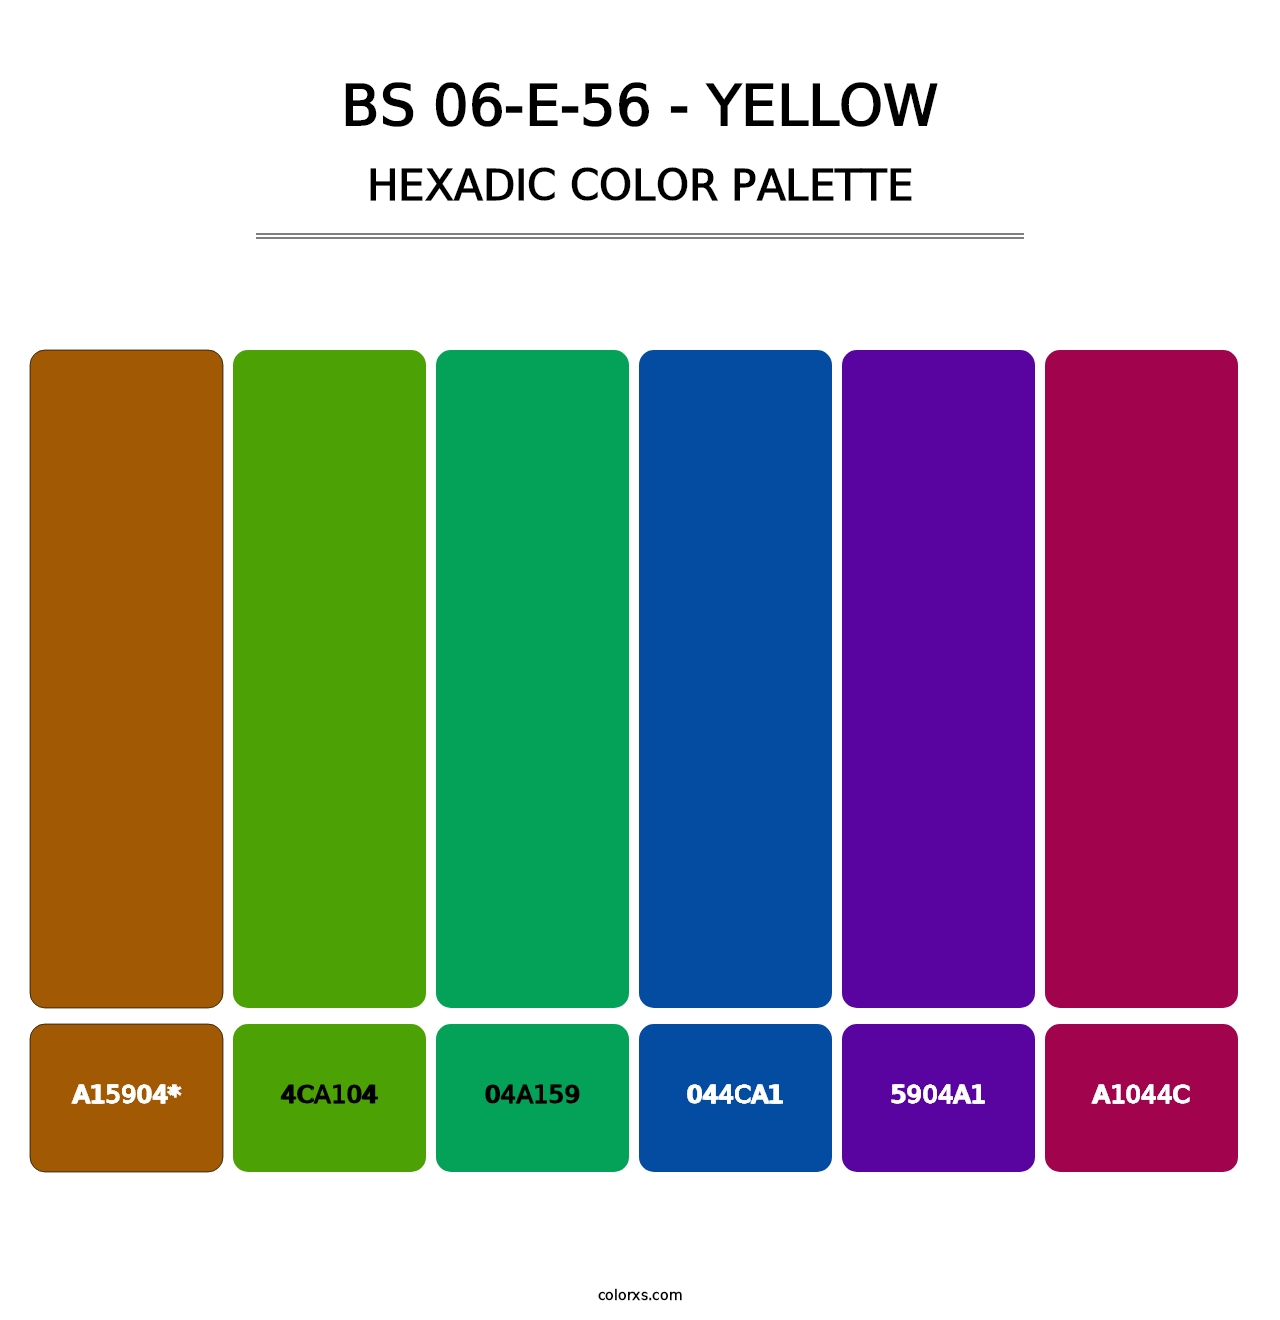 BS 06-E-56 - Yellow - Hexadic Color Palette